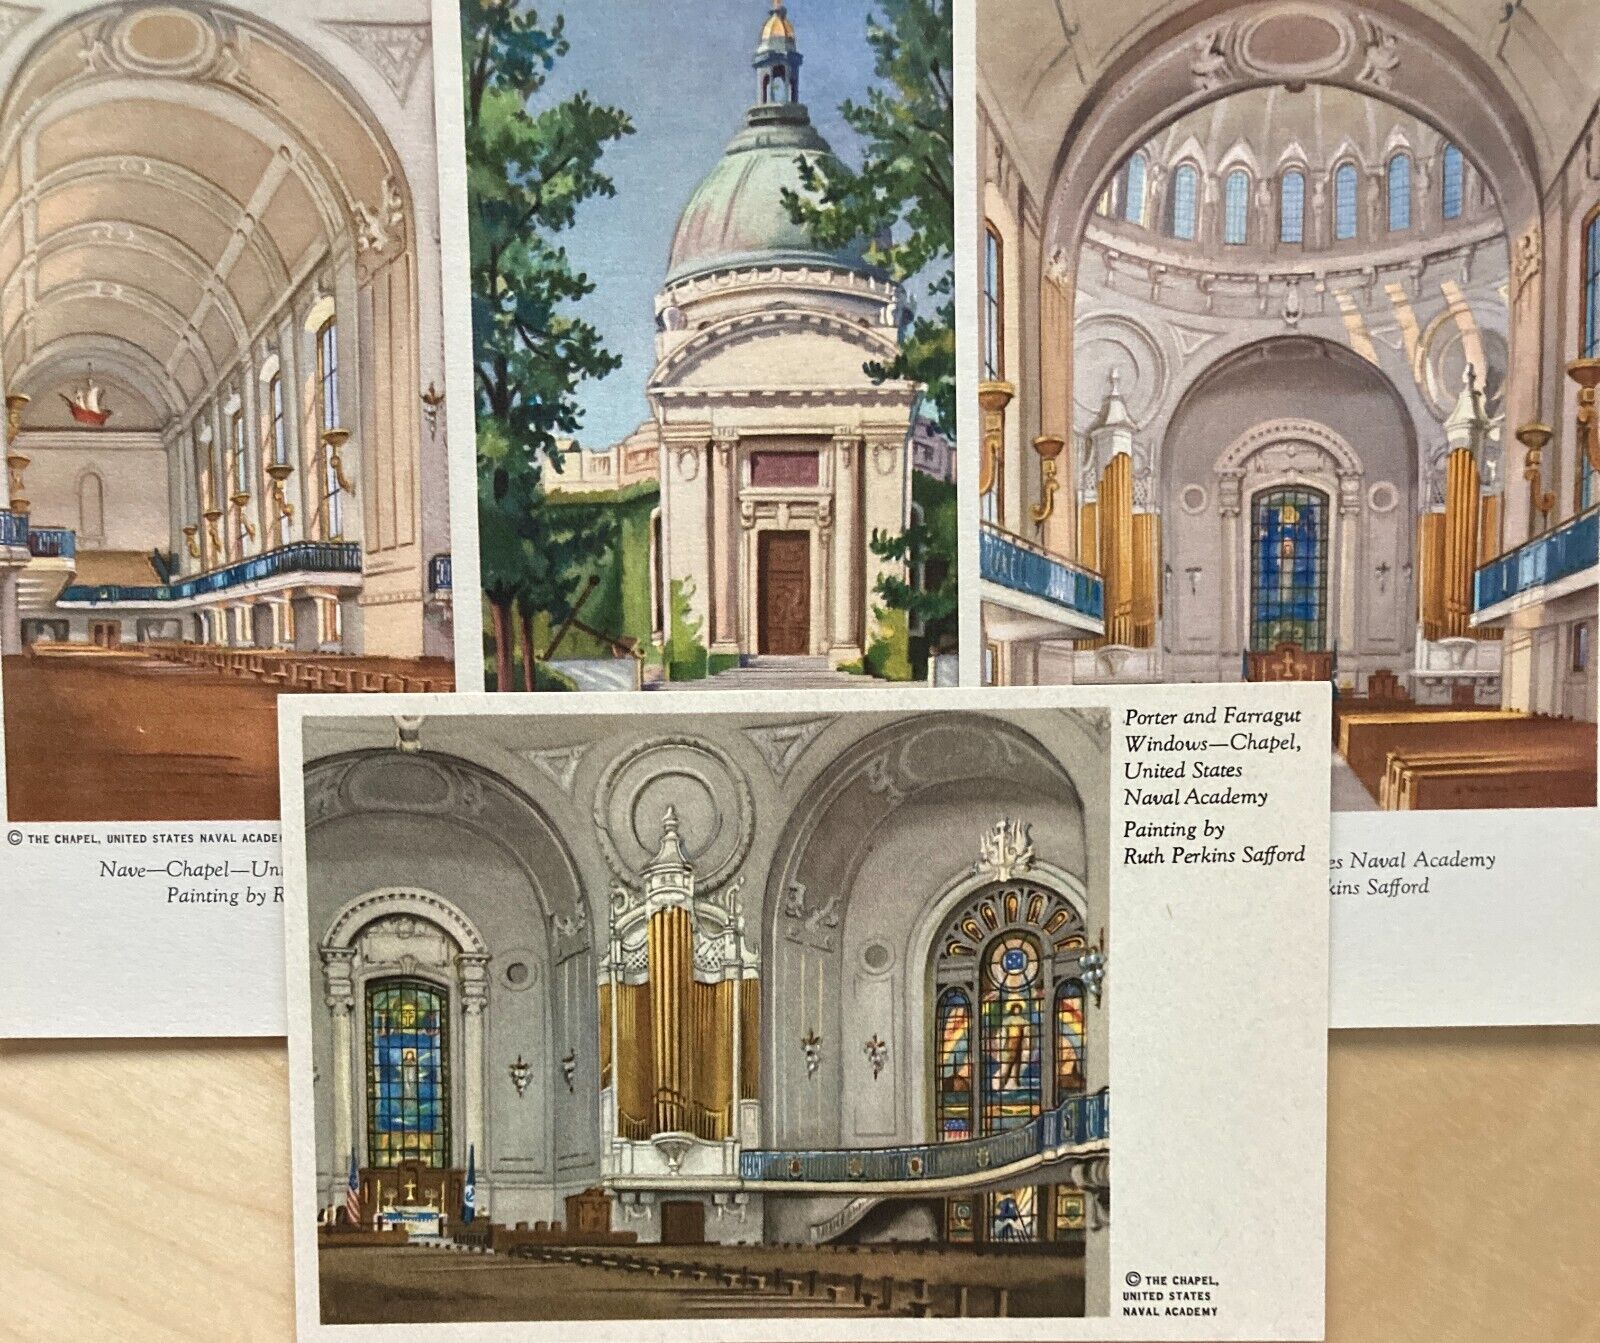 Lot of 4 Vintage Postcards US Naval Academy Chapel Painting Ruth Perkins Safford